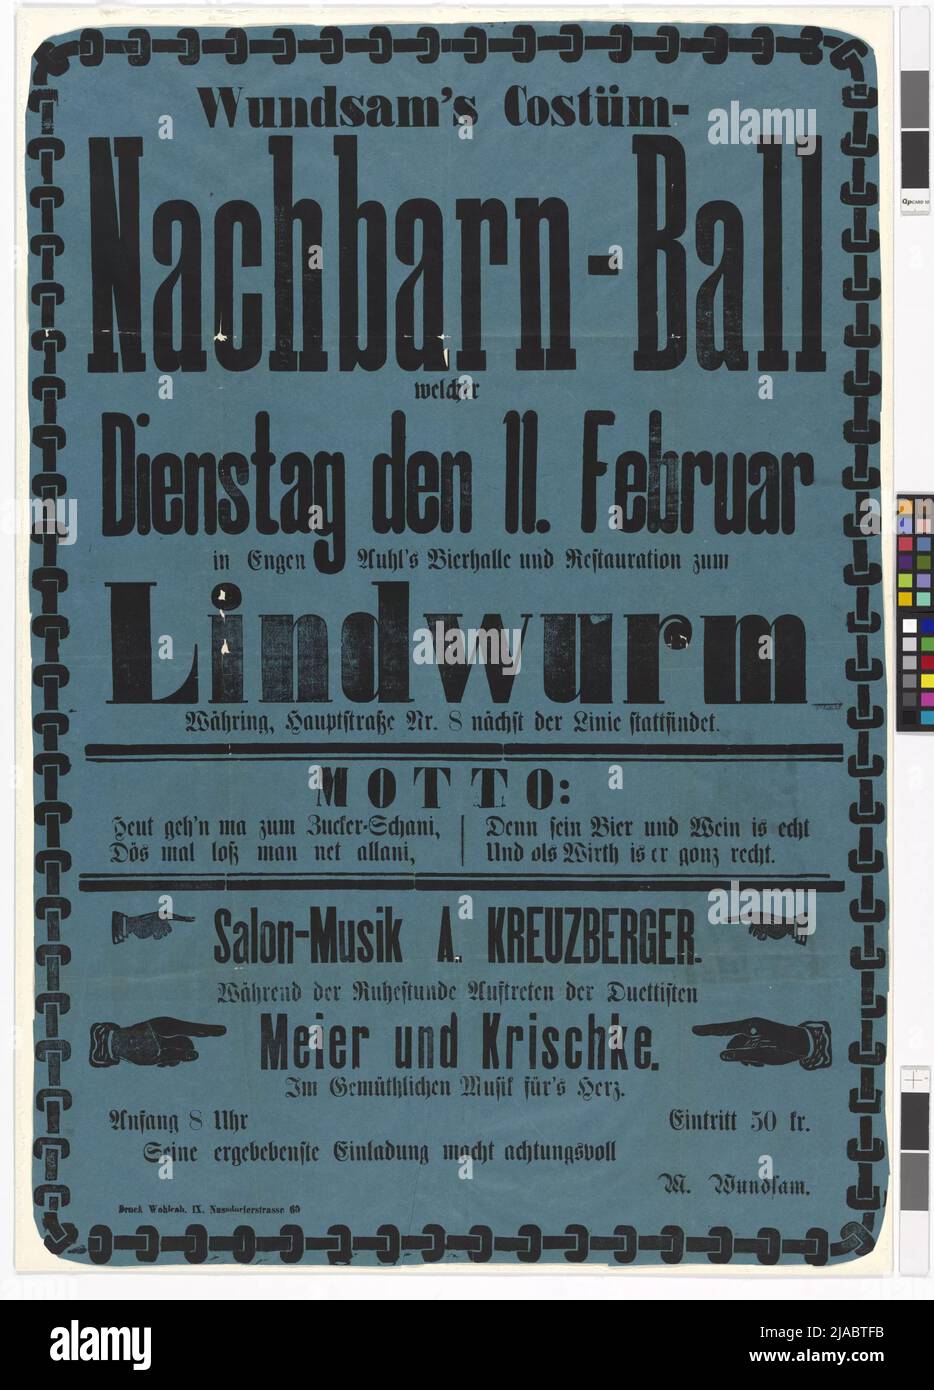 Poster for "Wundsam's Costüm-Nachbarn-Ball" in Eugen Uhl's "Beer Hall and Restoration of the Lindwurm" on February 11, 1879. Unknown Stock Photo